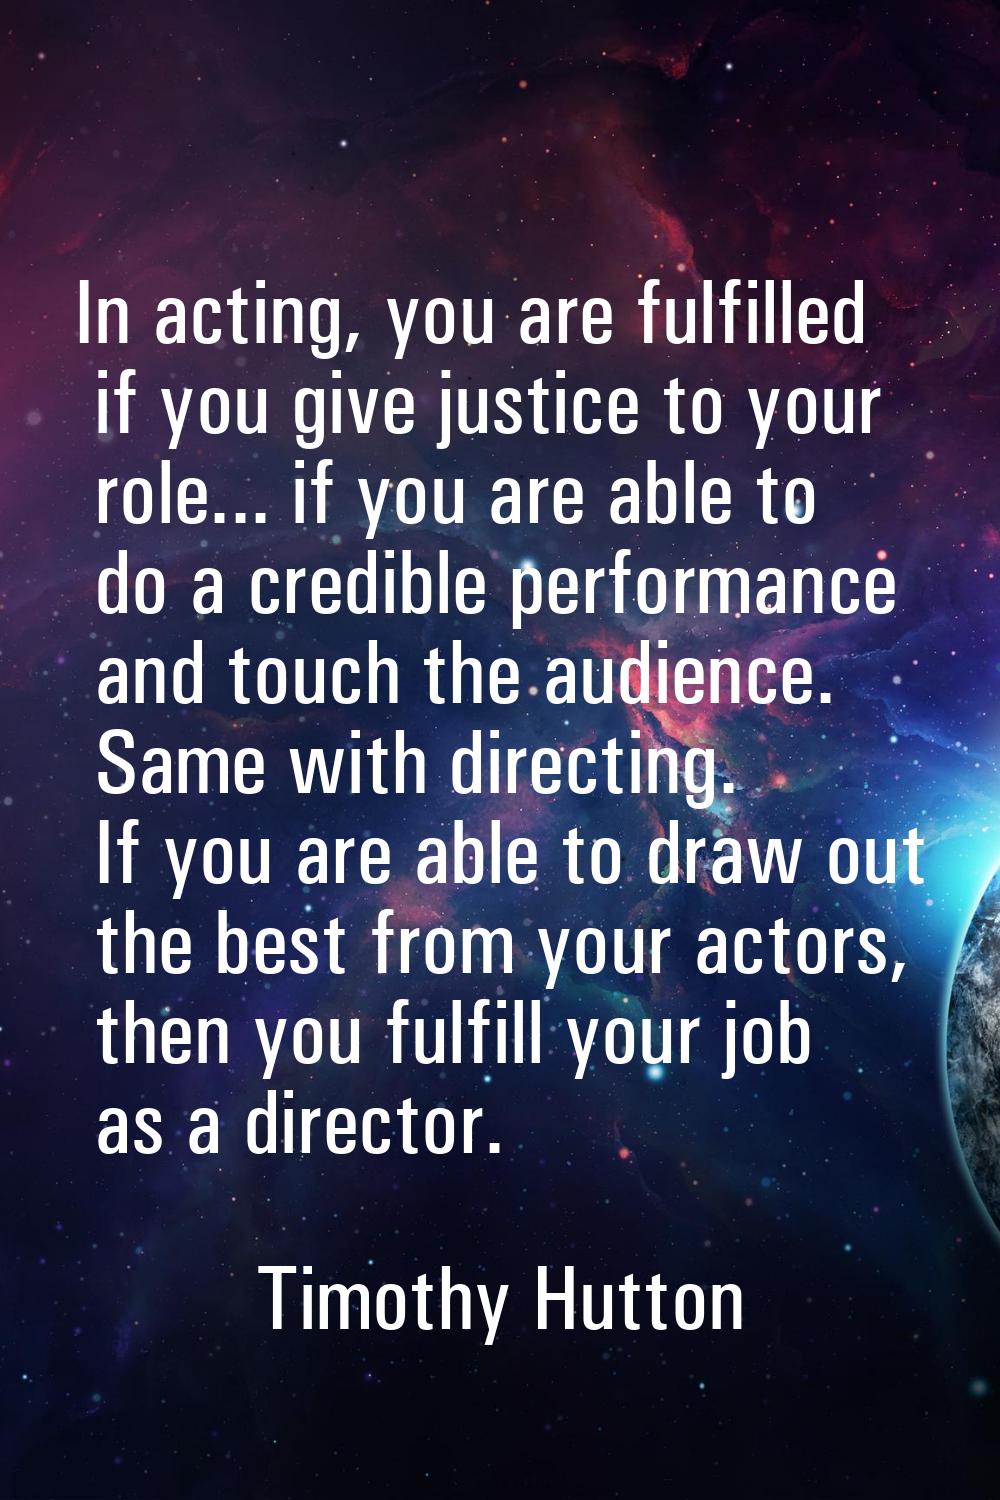 In acting, you are fulfilled if you give justice to your role... if you are able to do a credible p